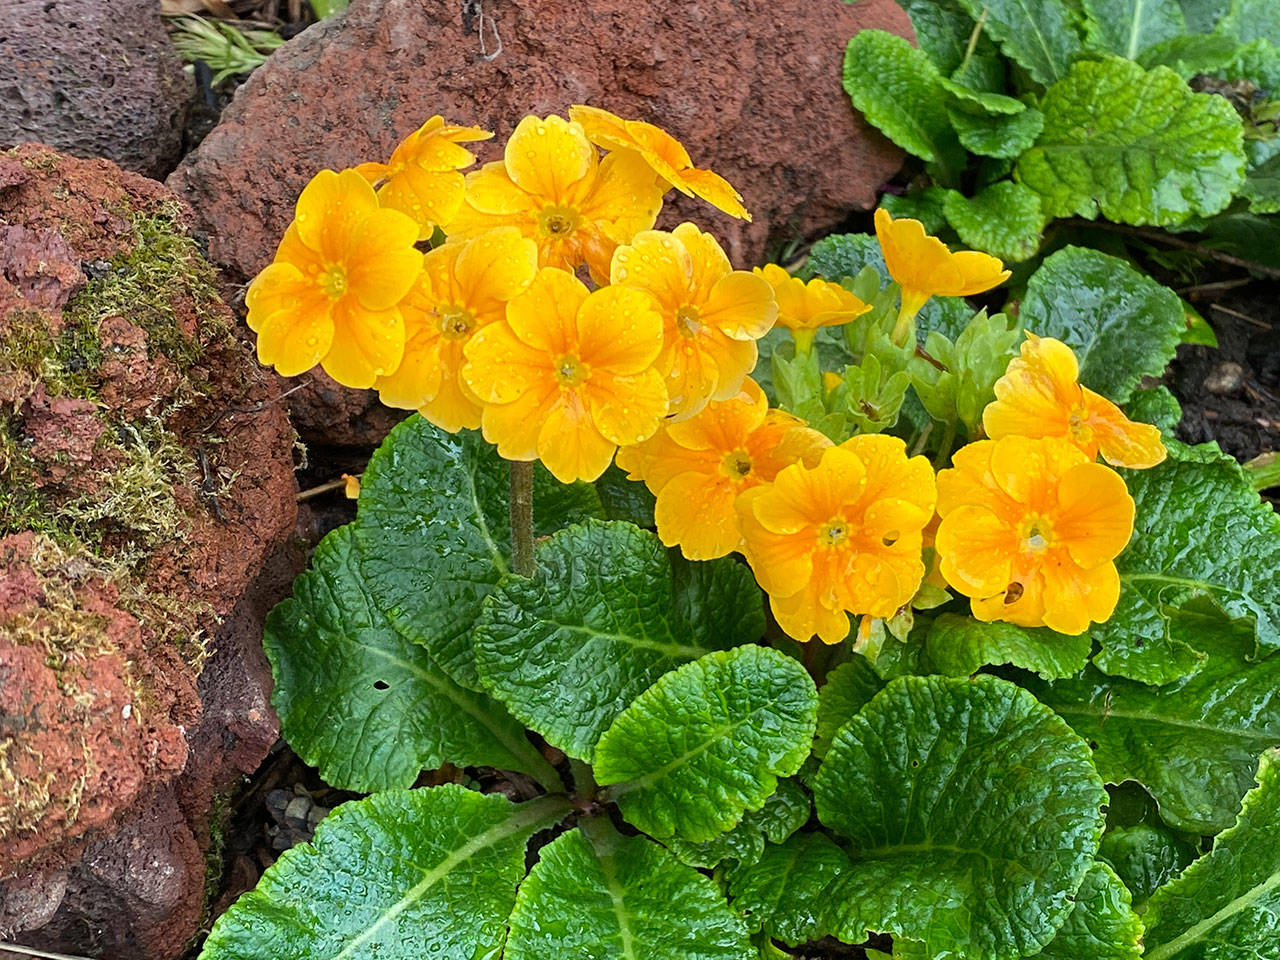 Pick primroses and other flowers with eye-catching color for those winter gardens. Photo by Sandy Cortez